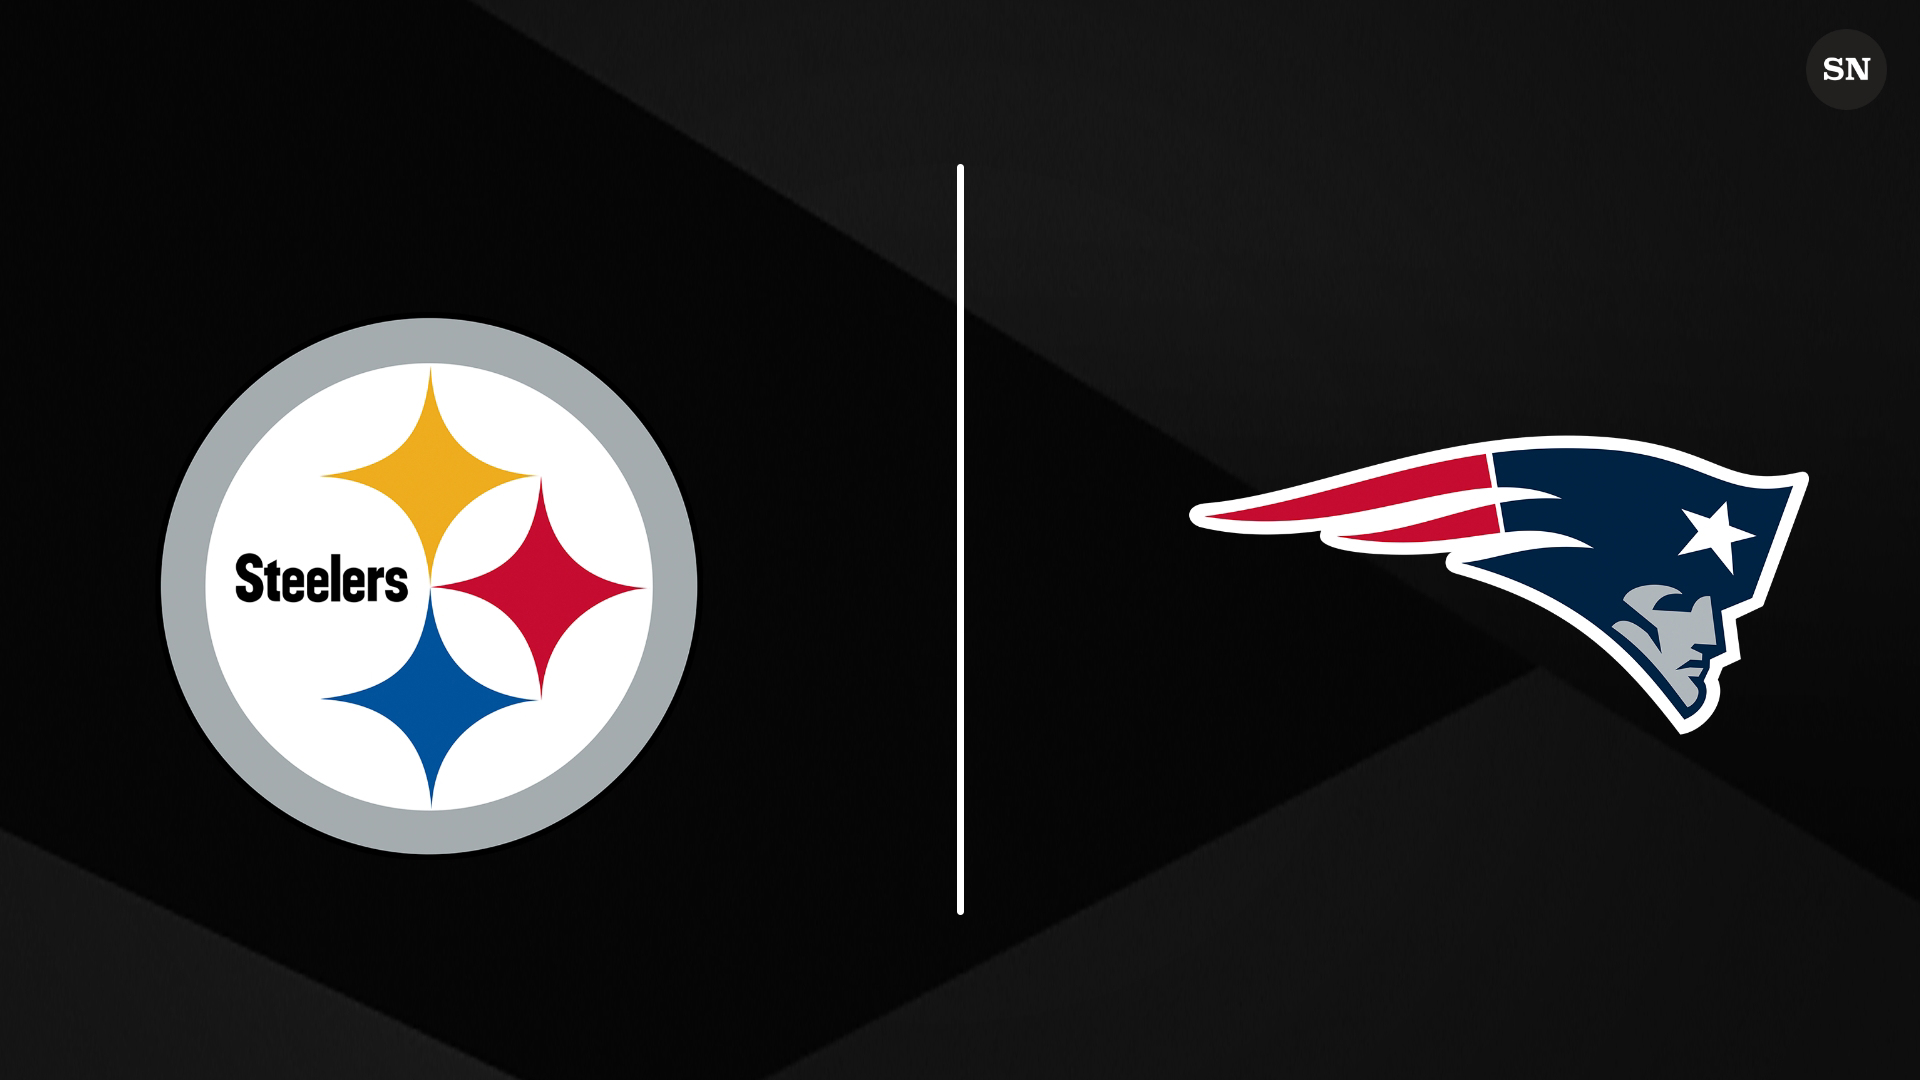 What time is the NFL game tonight? TV schedule, channel for Steelers vs